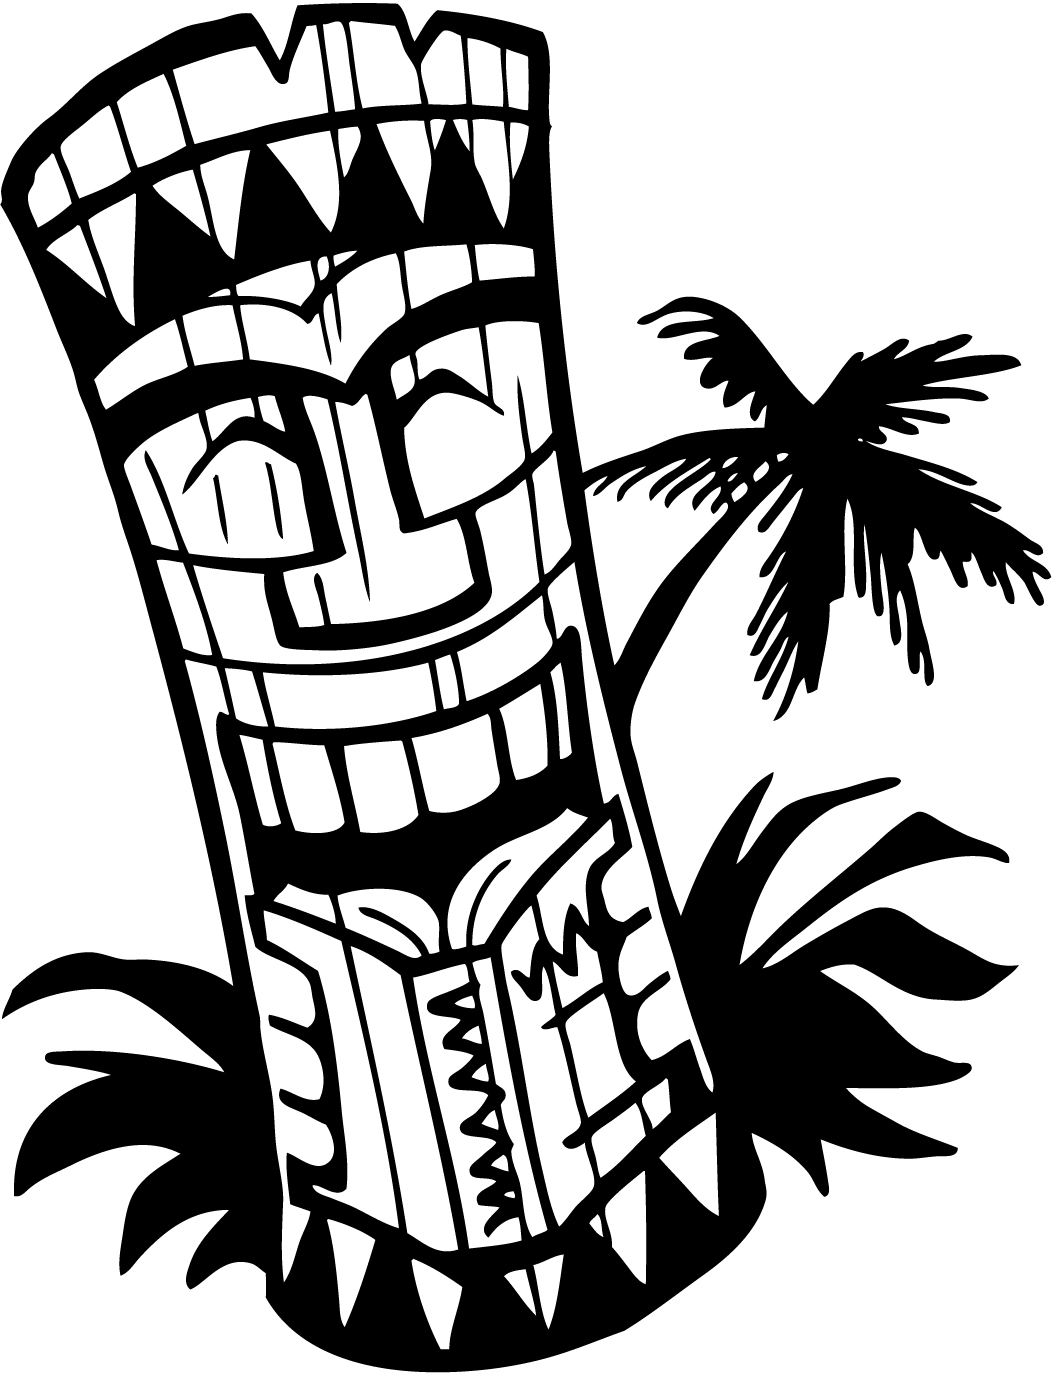 Free to share tiki torch clipart | ClipartMonk - Free Clip Art Images